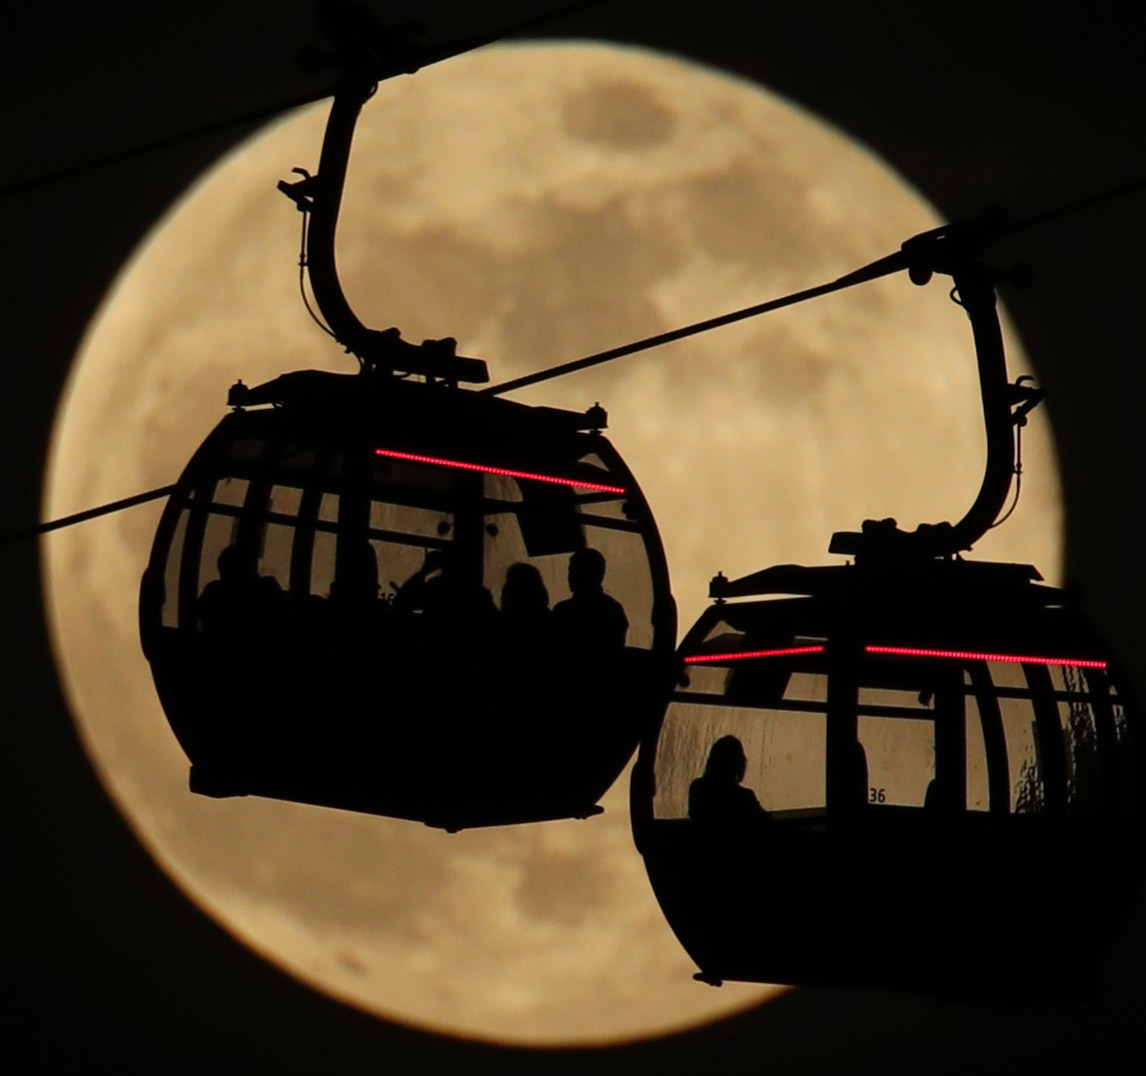 Emirates Air Line cable cars are silhouetted against the backdrop of the moon in Greenwich, London